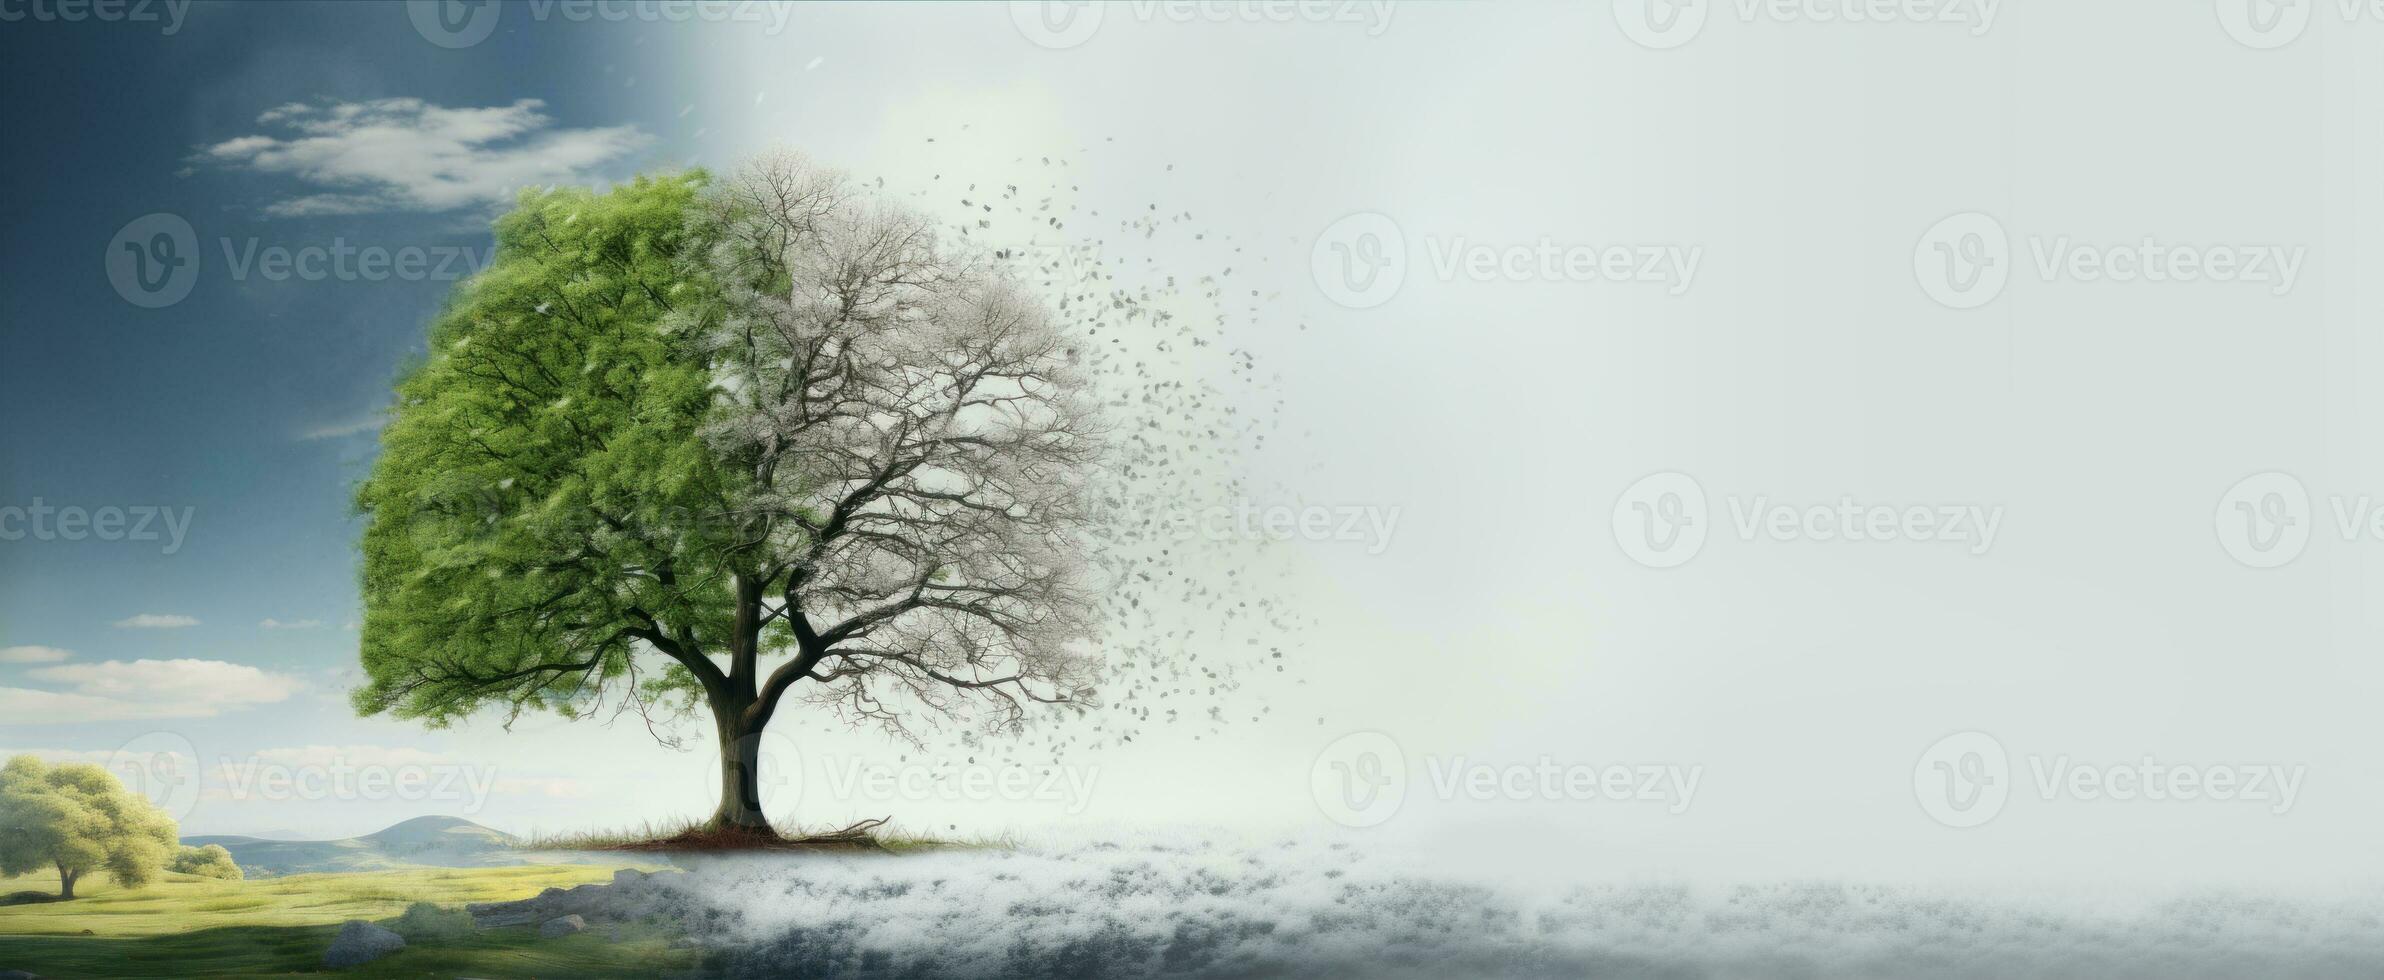 Tree with lush green leaves on one side, and bare branches on the other side with flying snowflakes. Symbol of transition from one season to another. Concept of changing to winter time. AI Generated photo